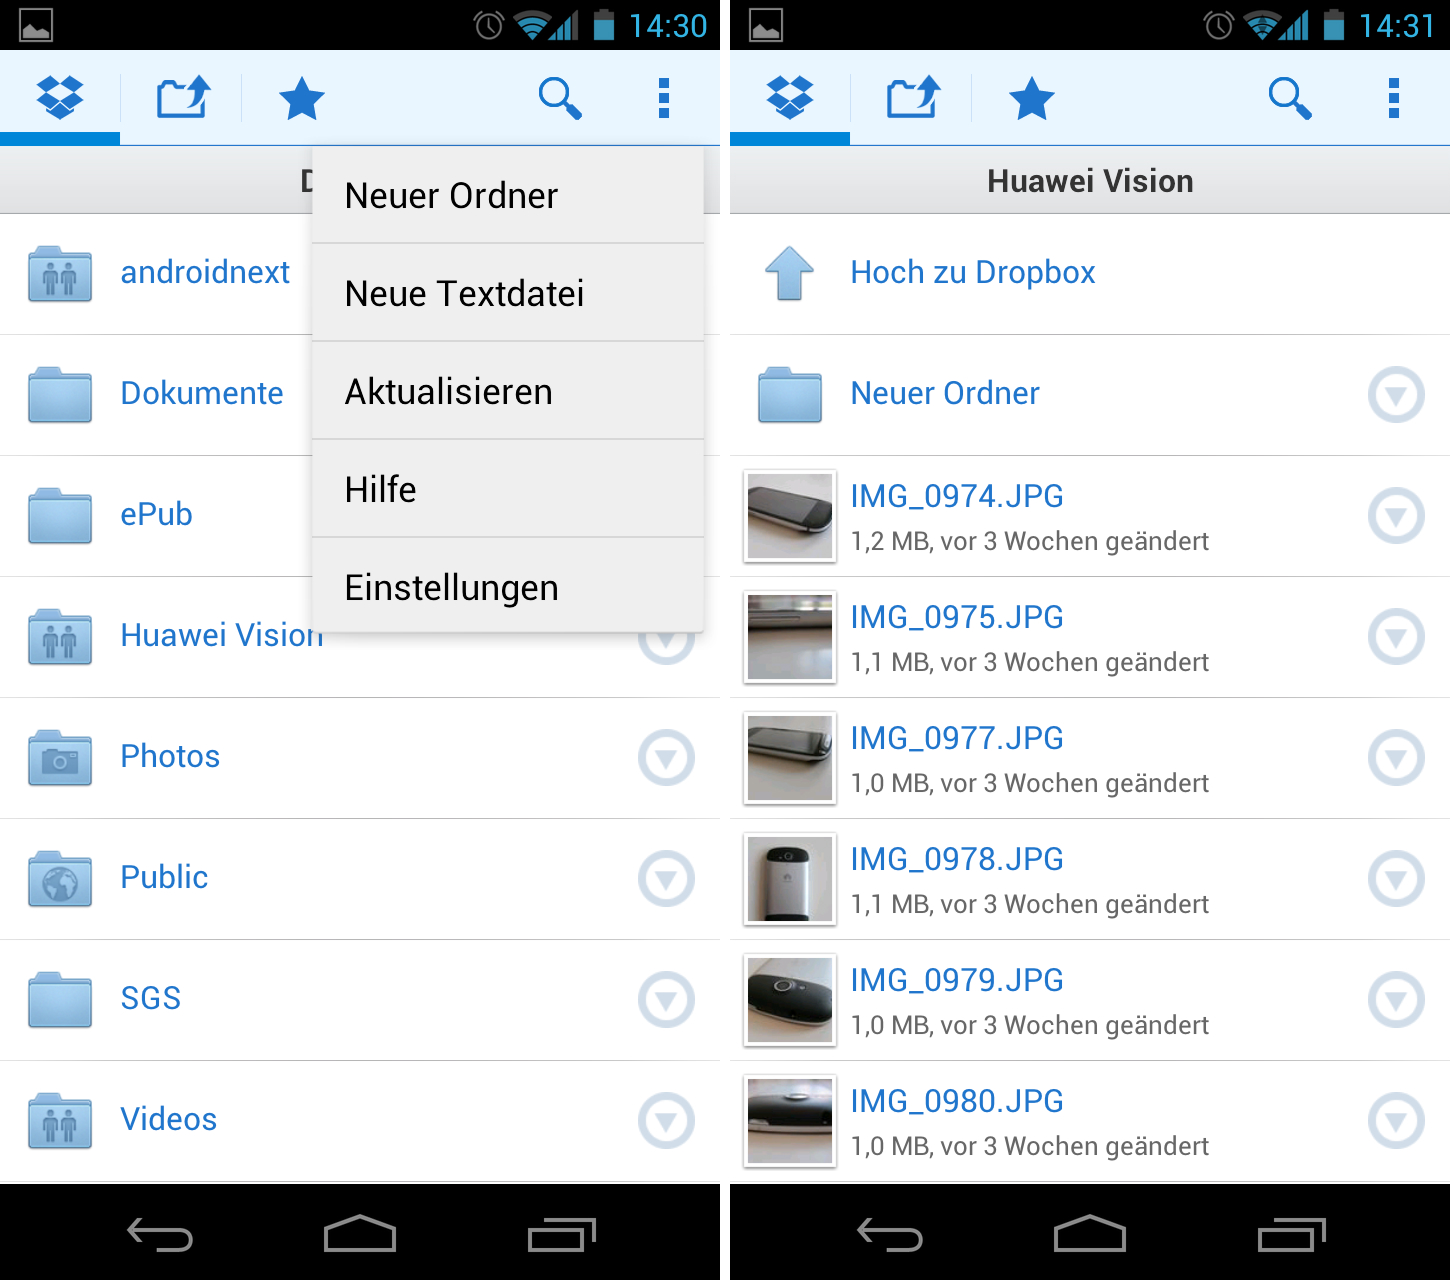 Reliable and well-designed cloud storage app. Image Credit: AndroidNext